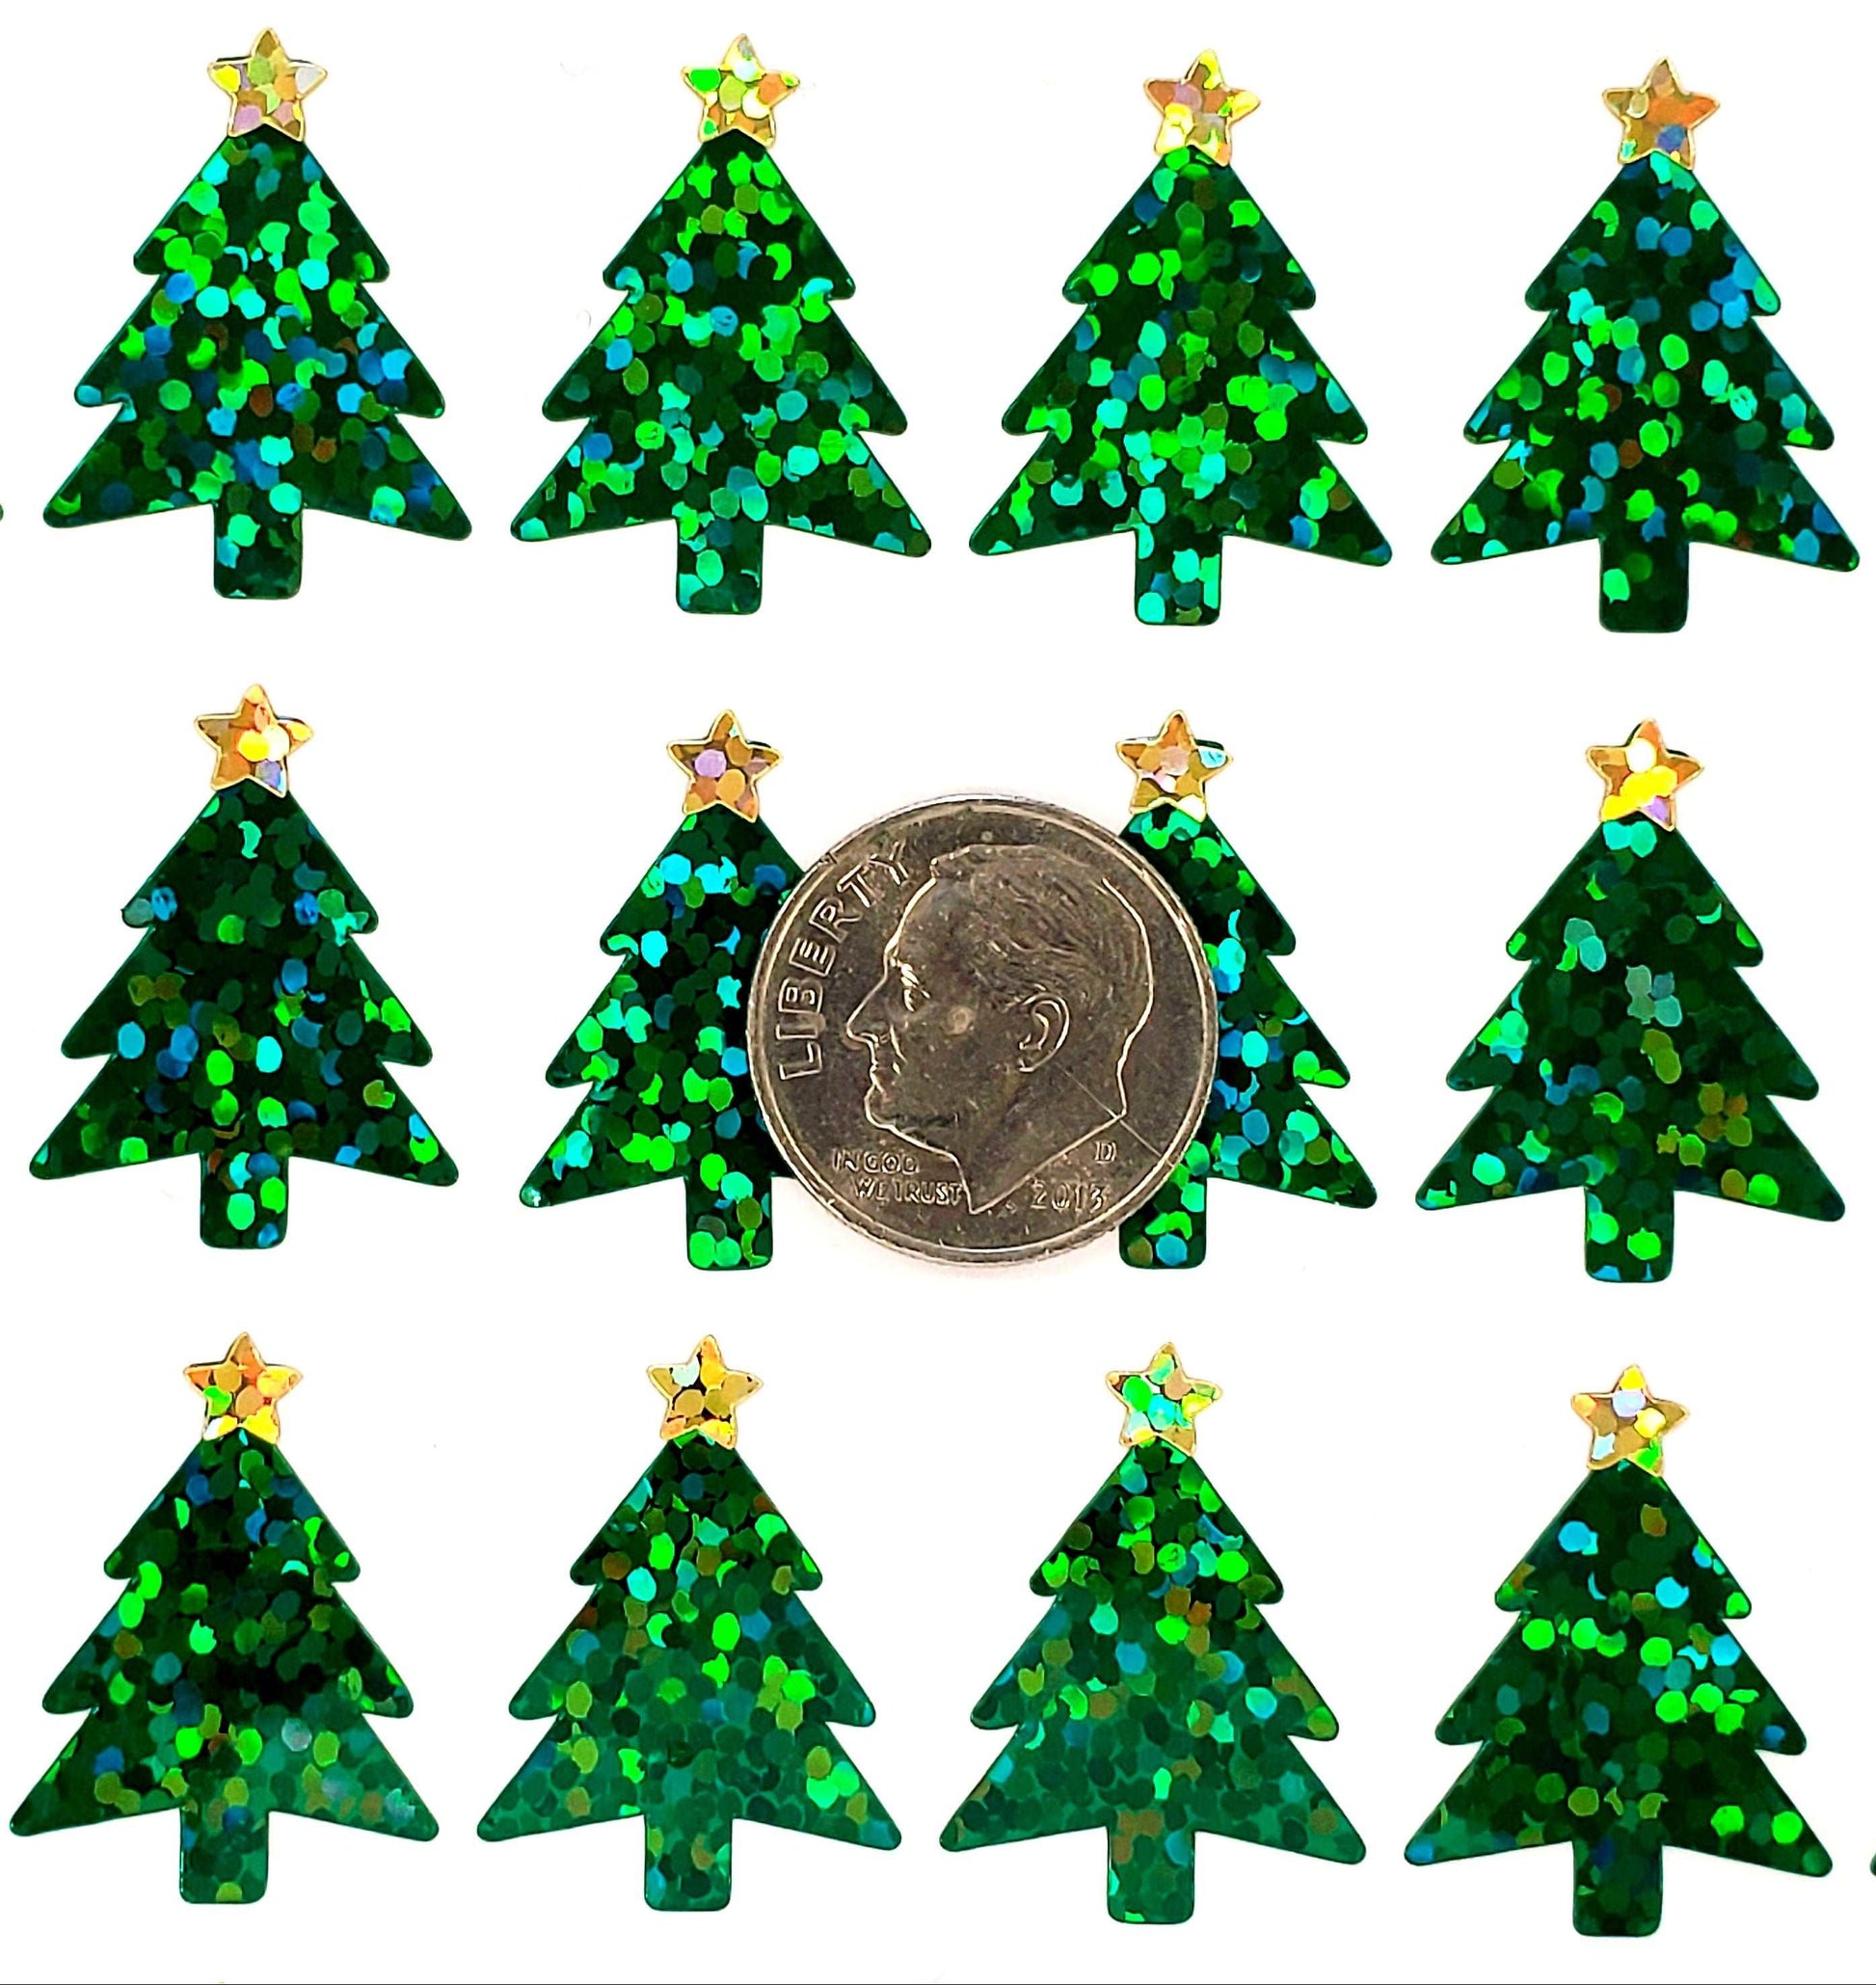 Christmas Trees Sticker Sheet, set of 50 Evergreen Pine Tree with gold star decorative stickers for ornaments, holiday cards and gift tags.